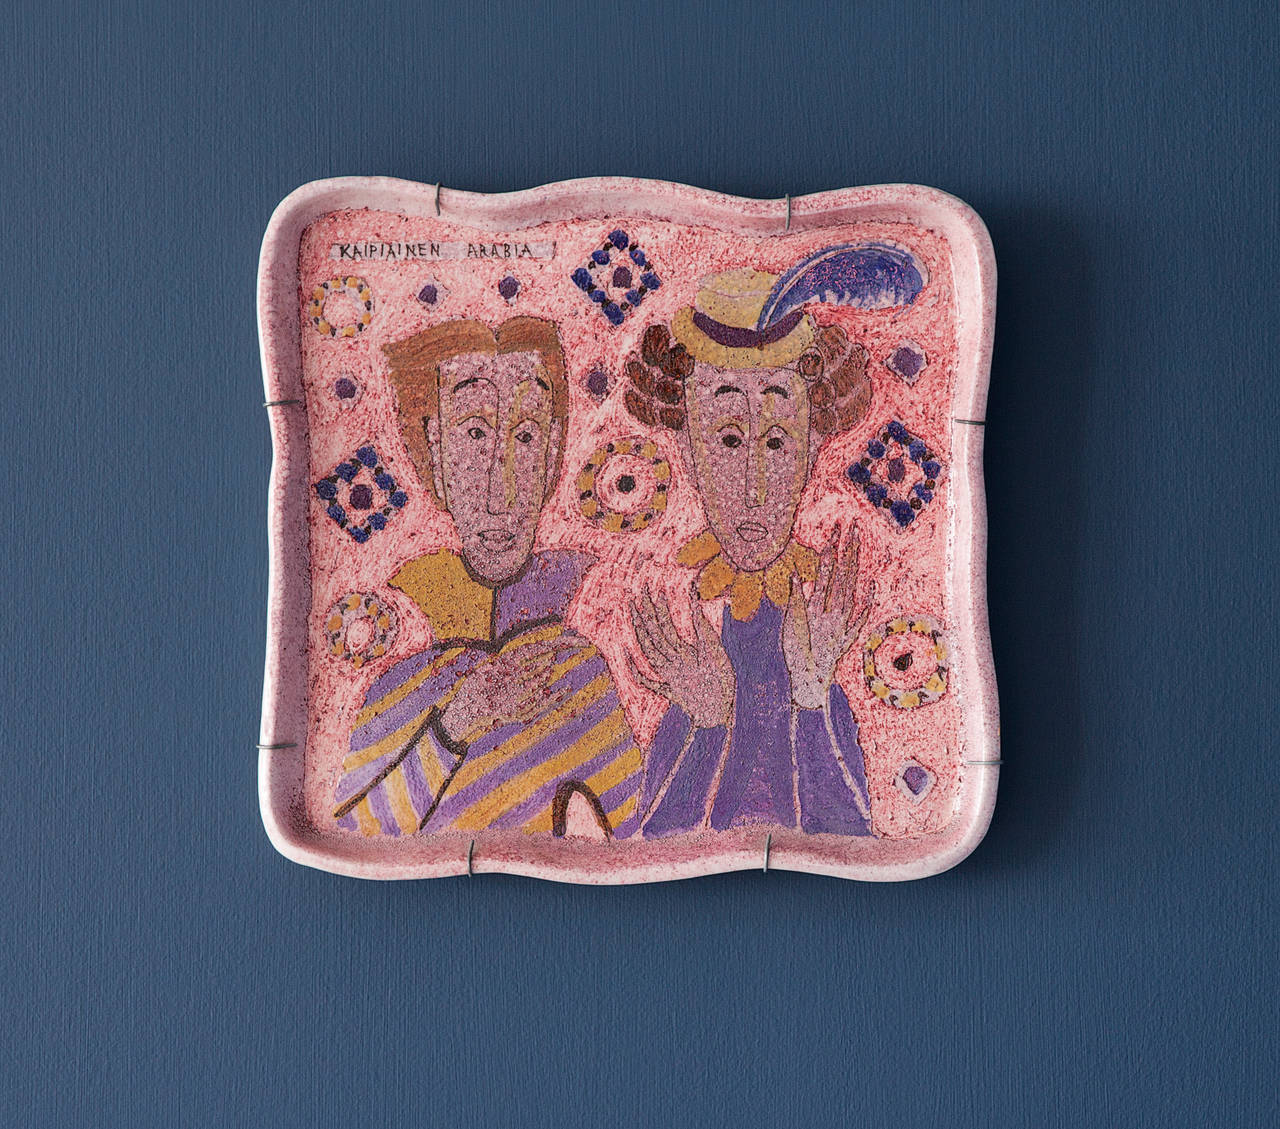 Unique glazed ceramic wall platter with decoration on pink fund by Birger Kaipiainen.